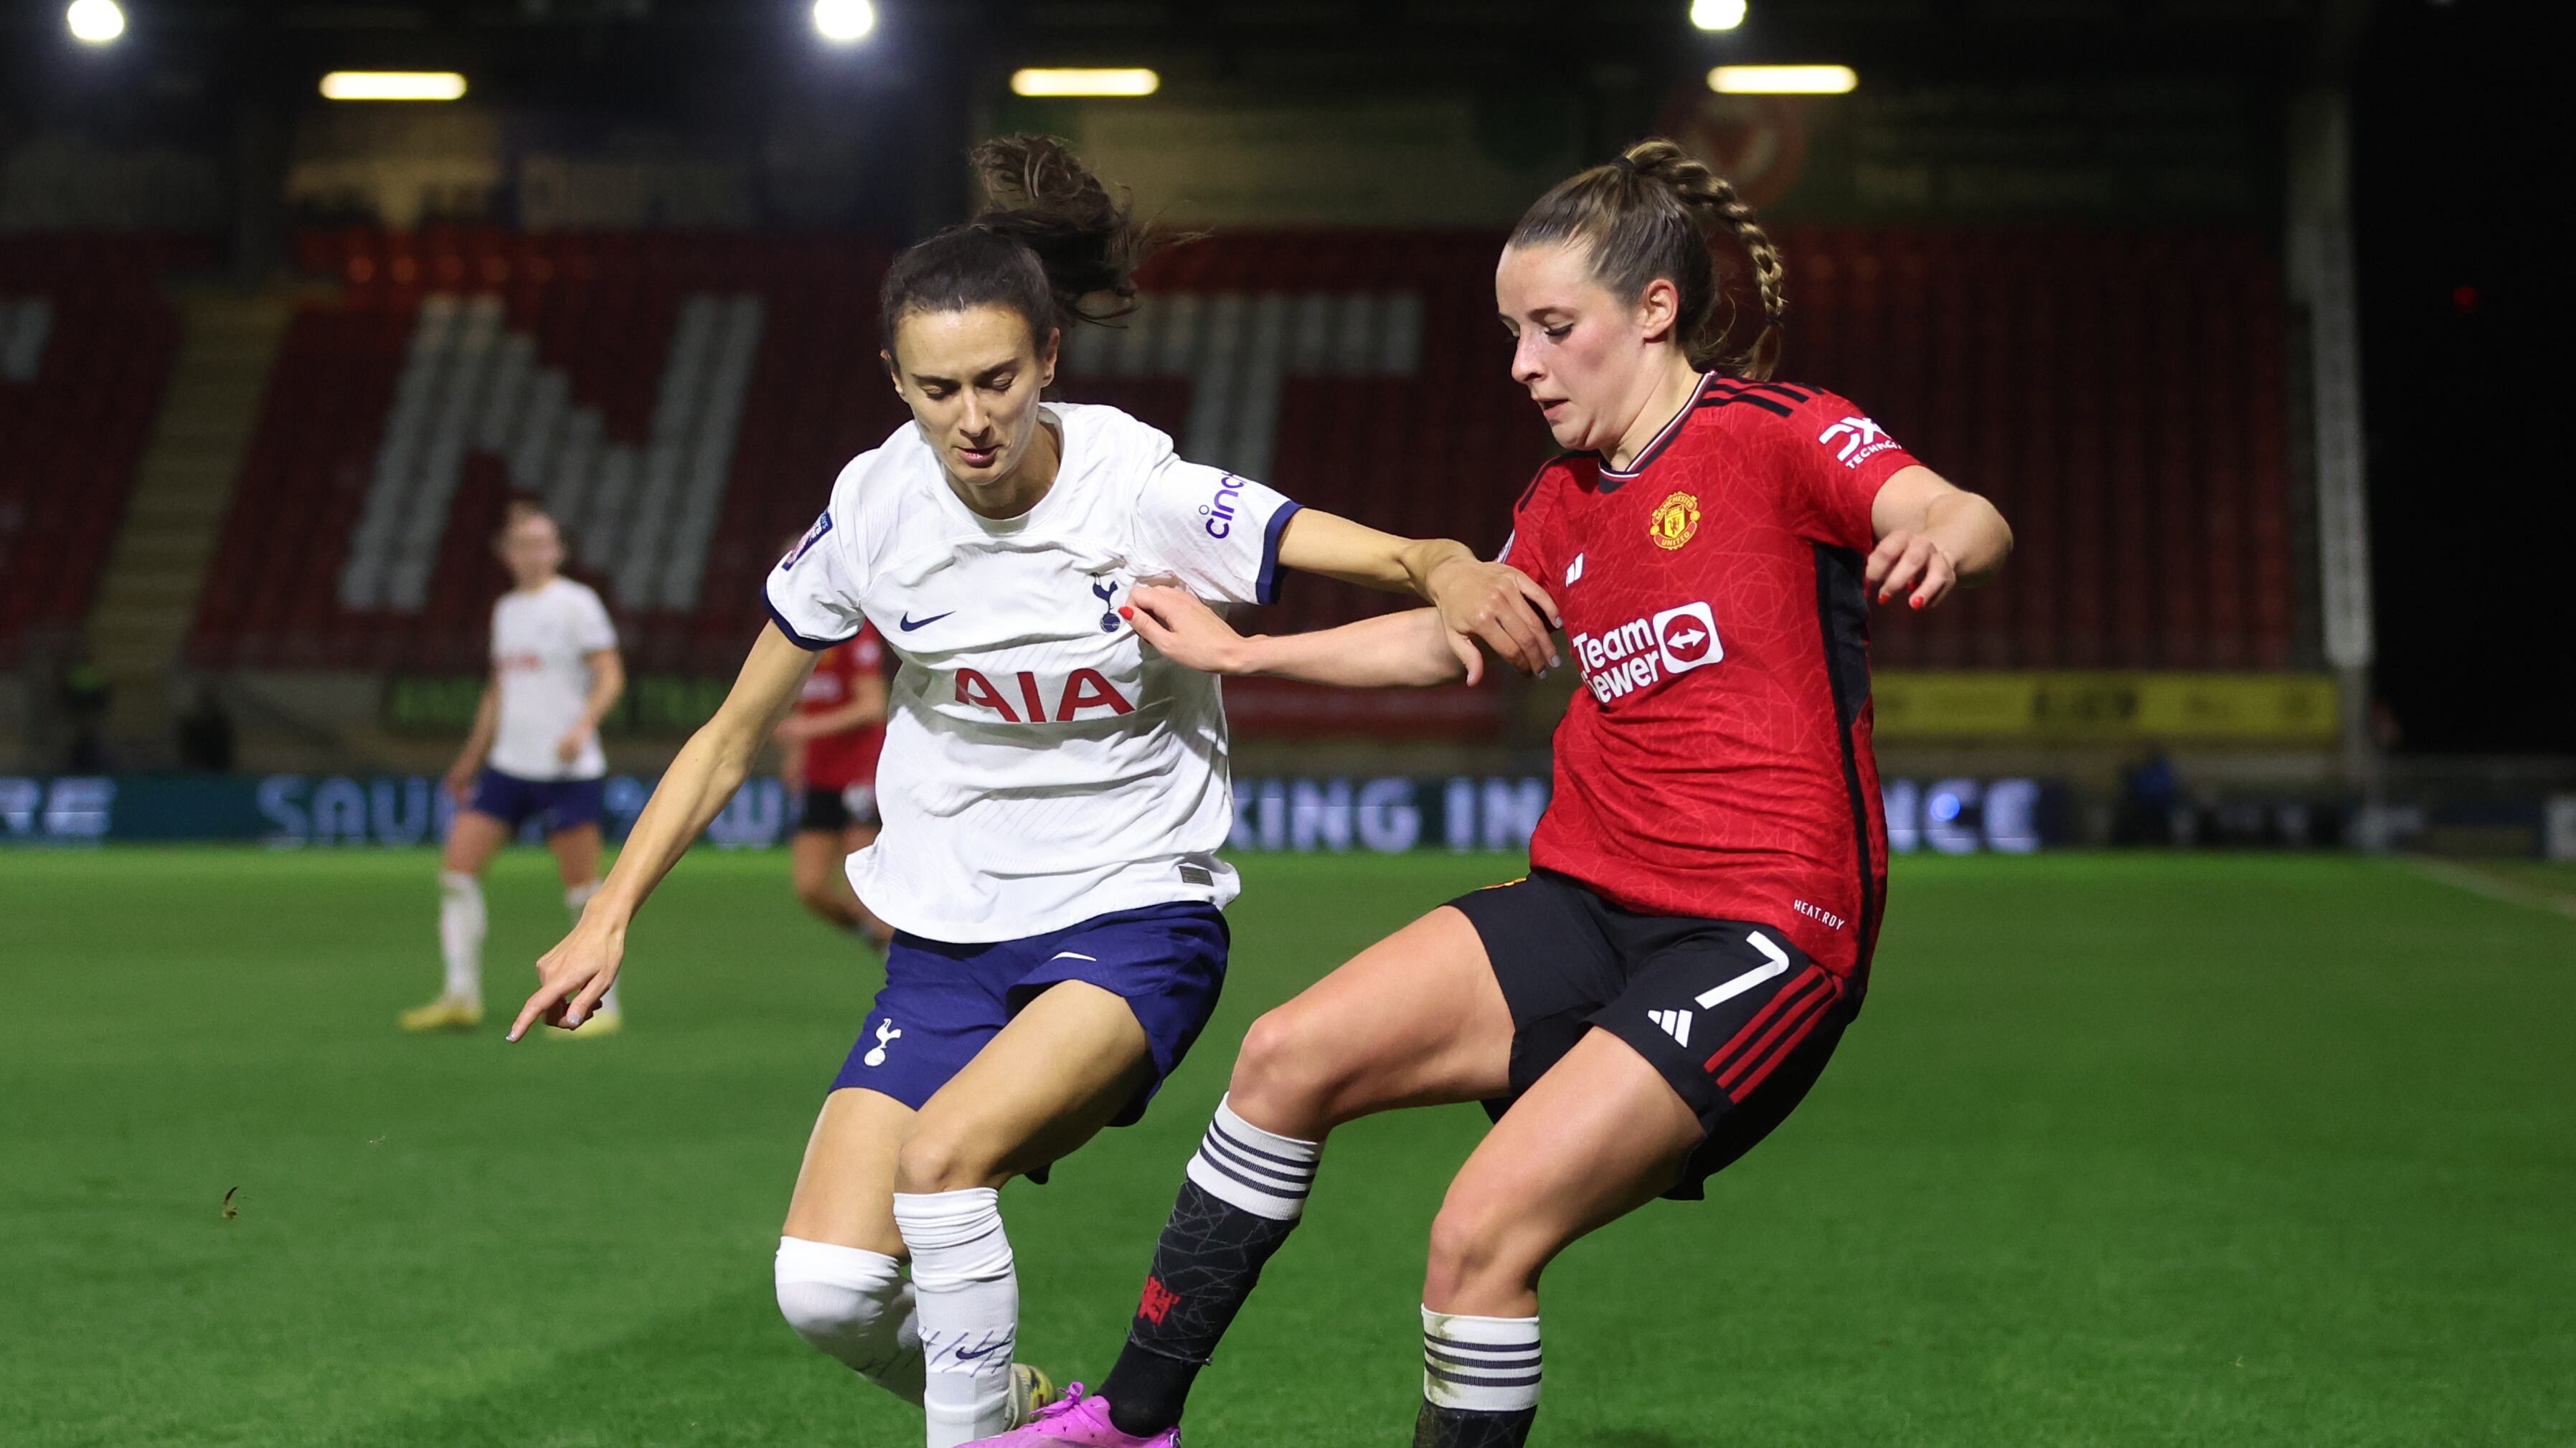 Tottenham and Manchester United will meet in the Women’s FA Cup final